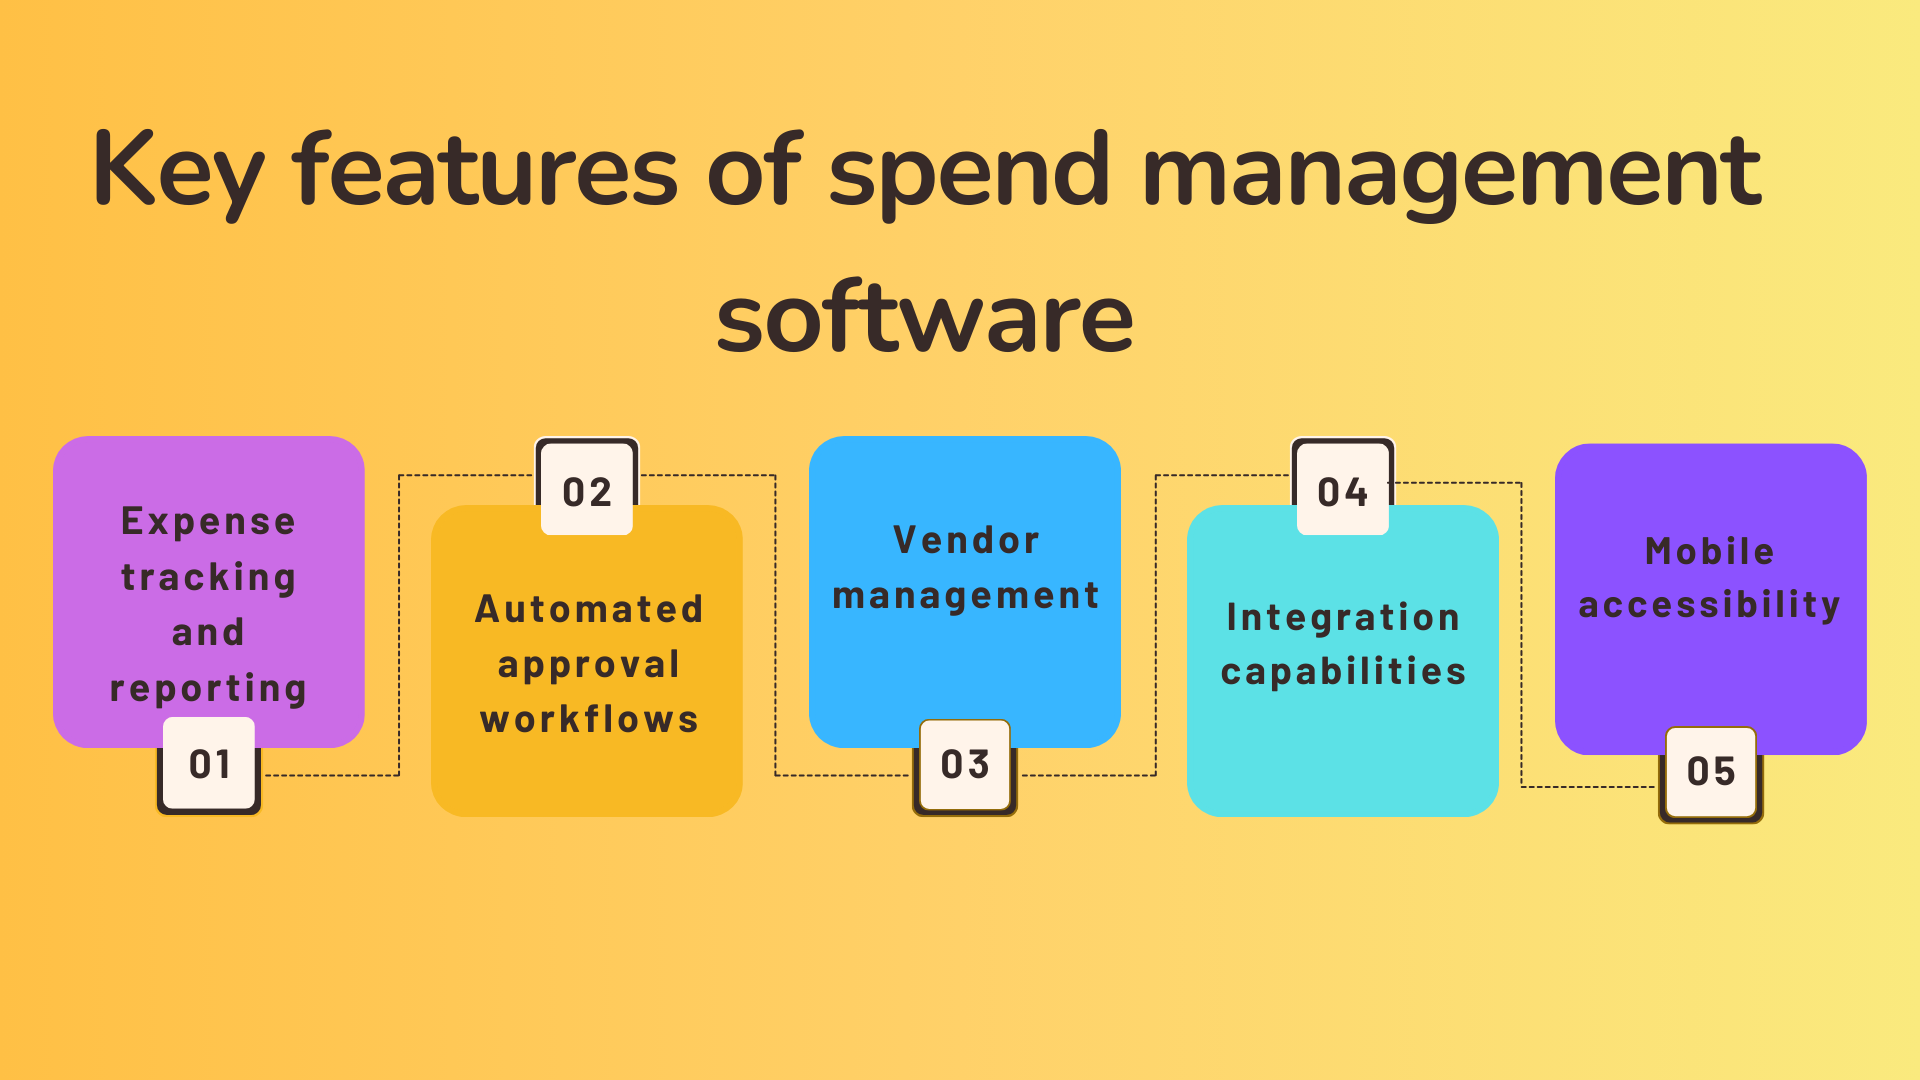 Key features of spend management software